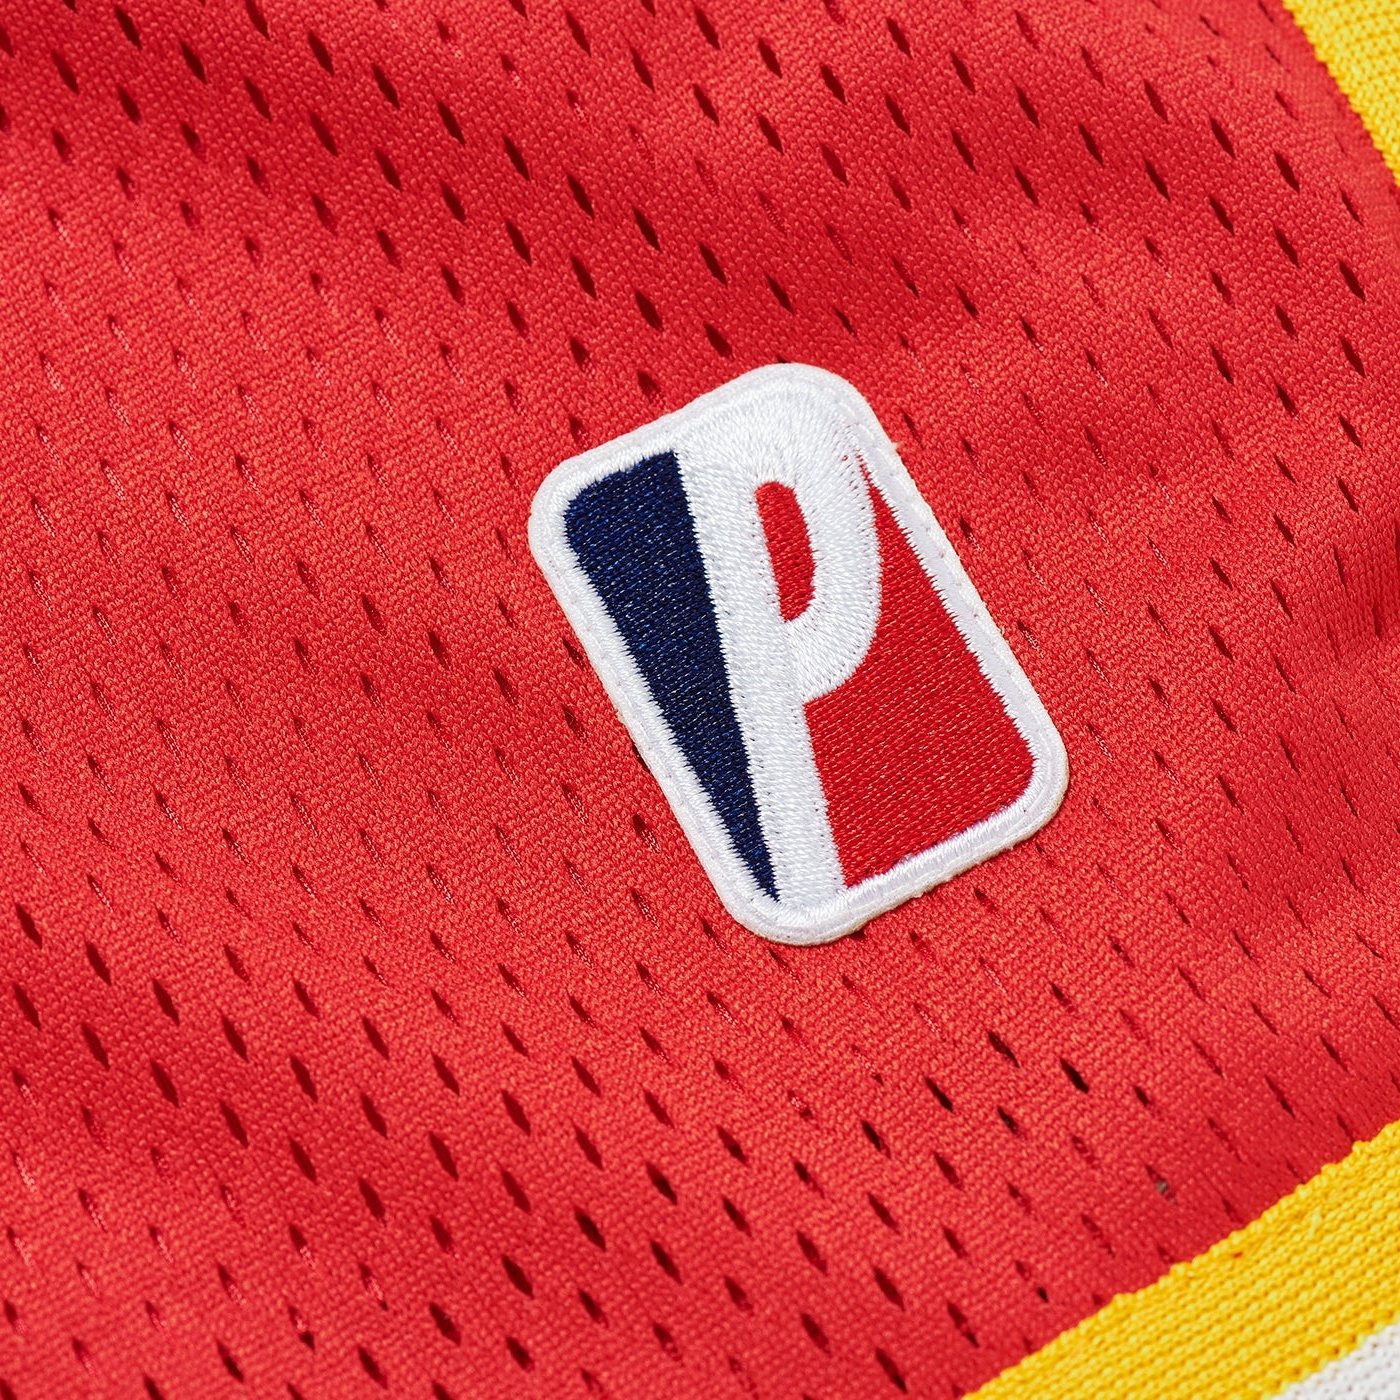 Thumbnail PALACE SPITFIRE BASKETBALL SHORT RED one color